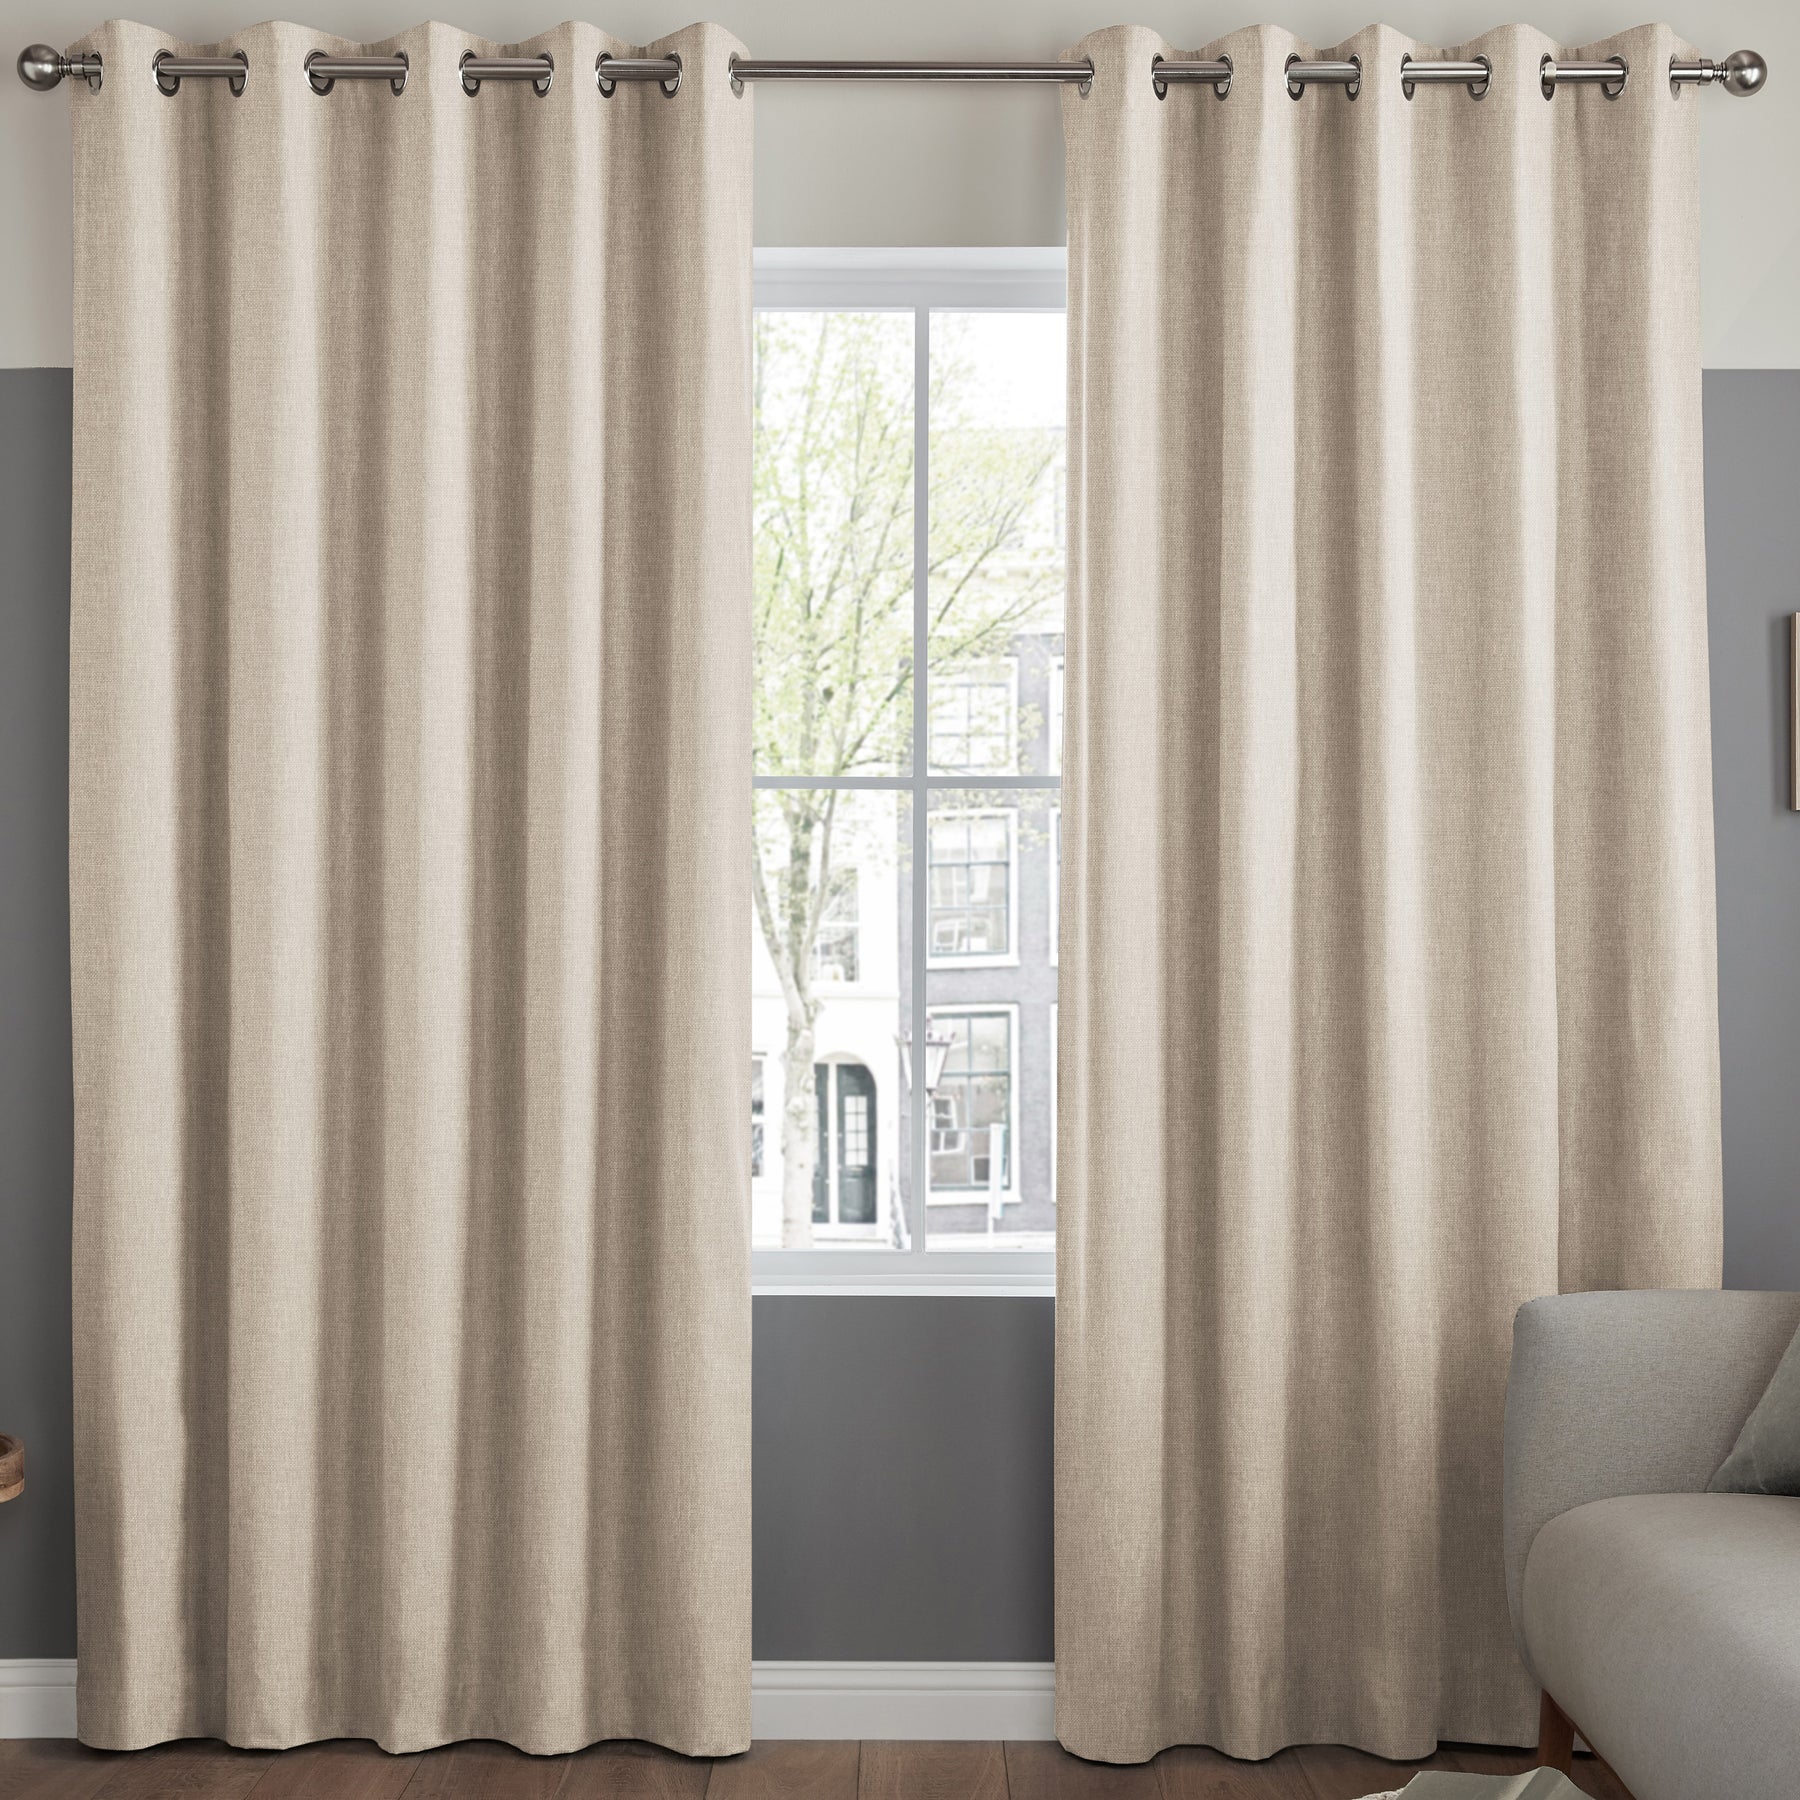 Positano Made To Measure Curtains Oyster